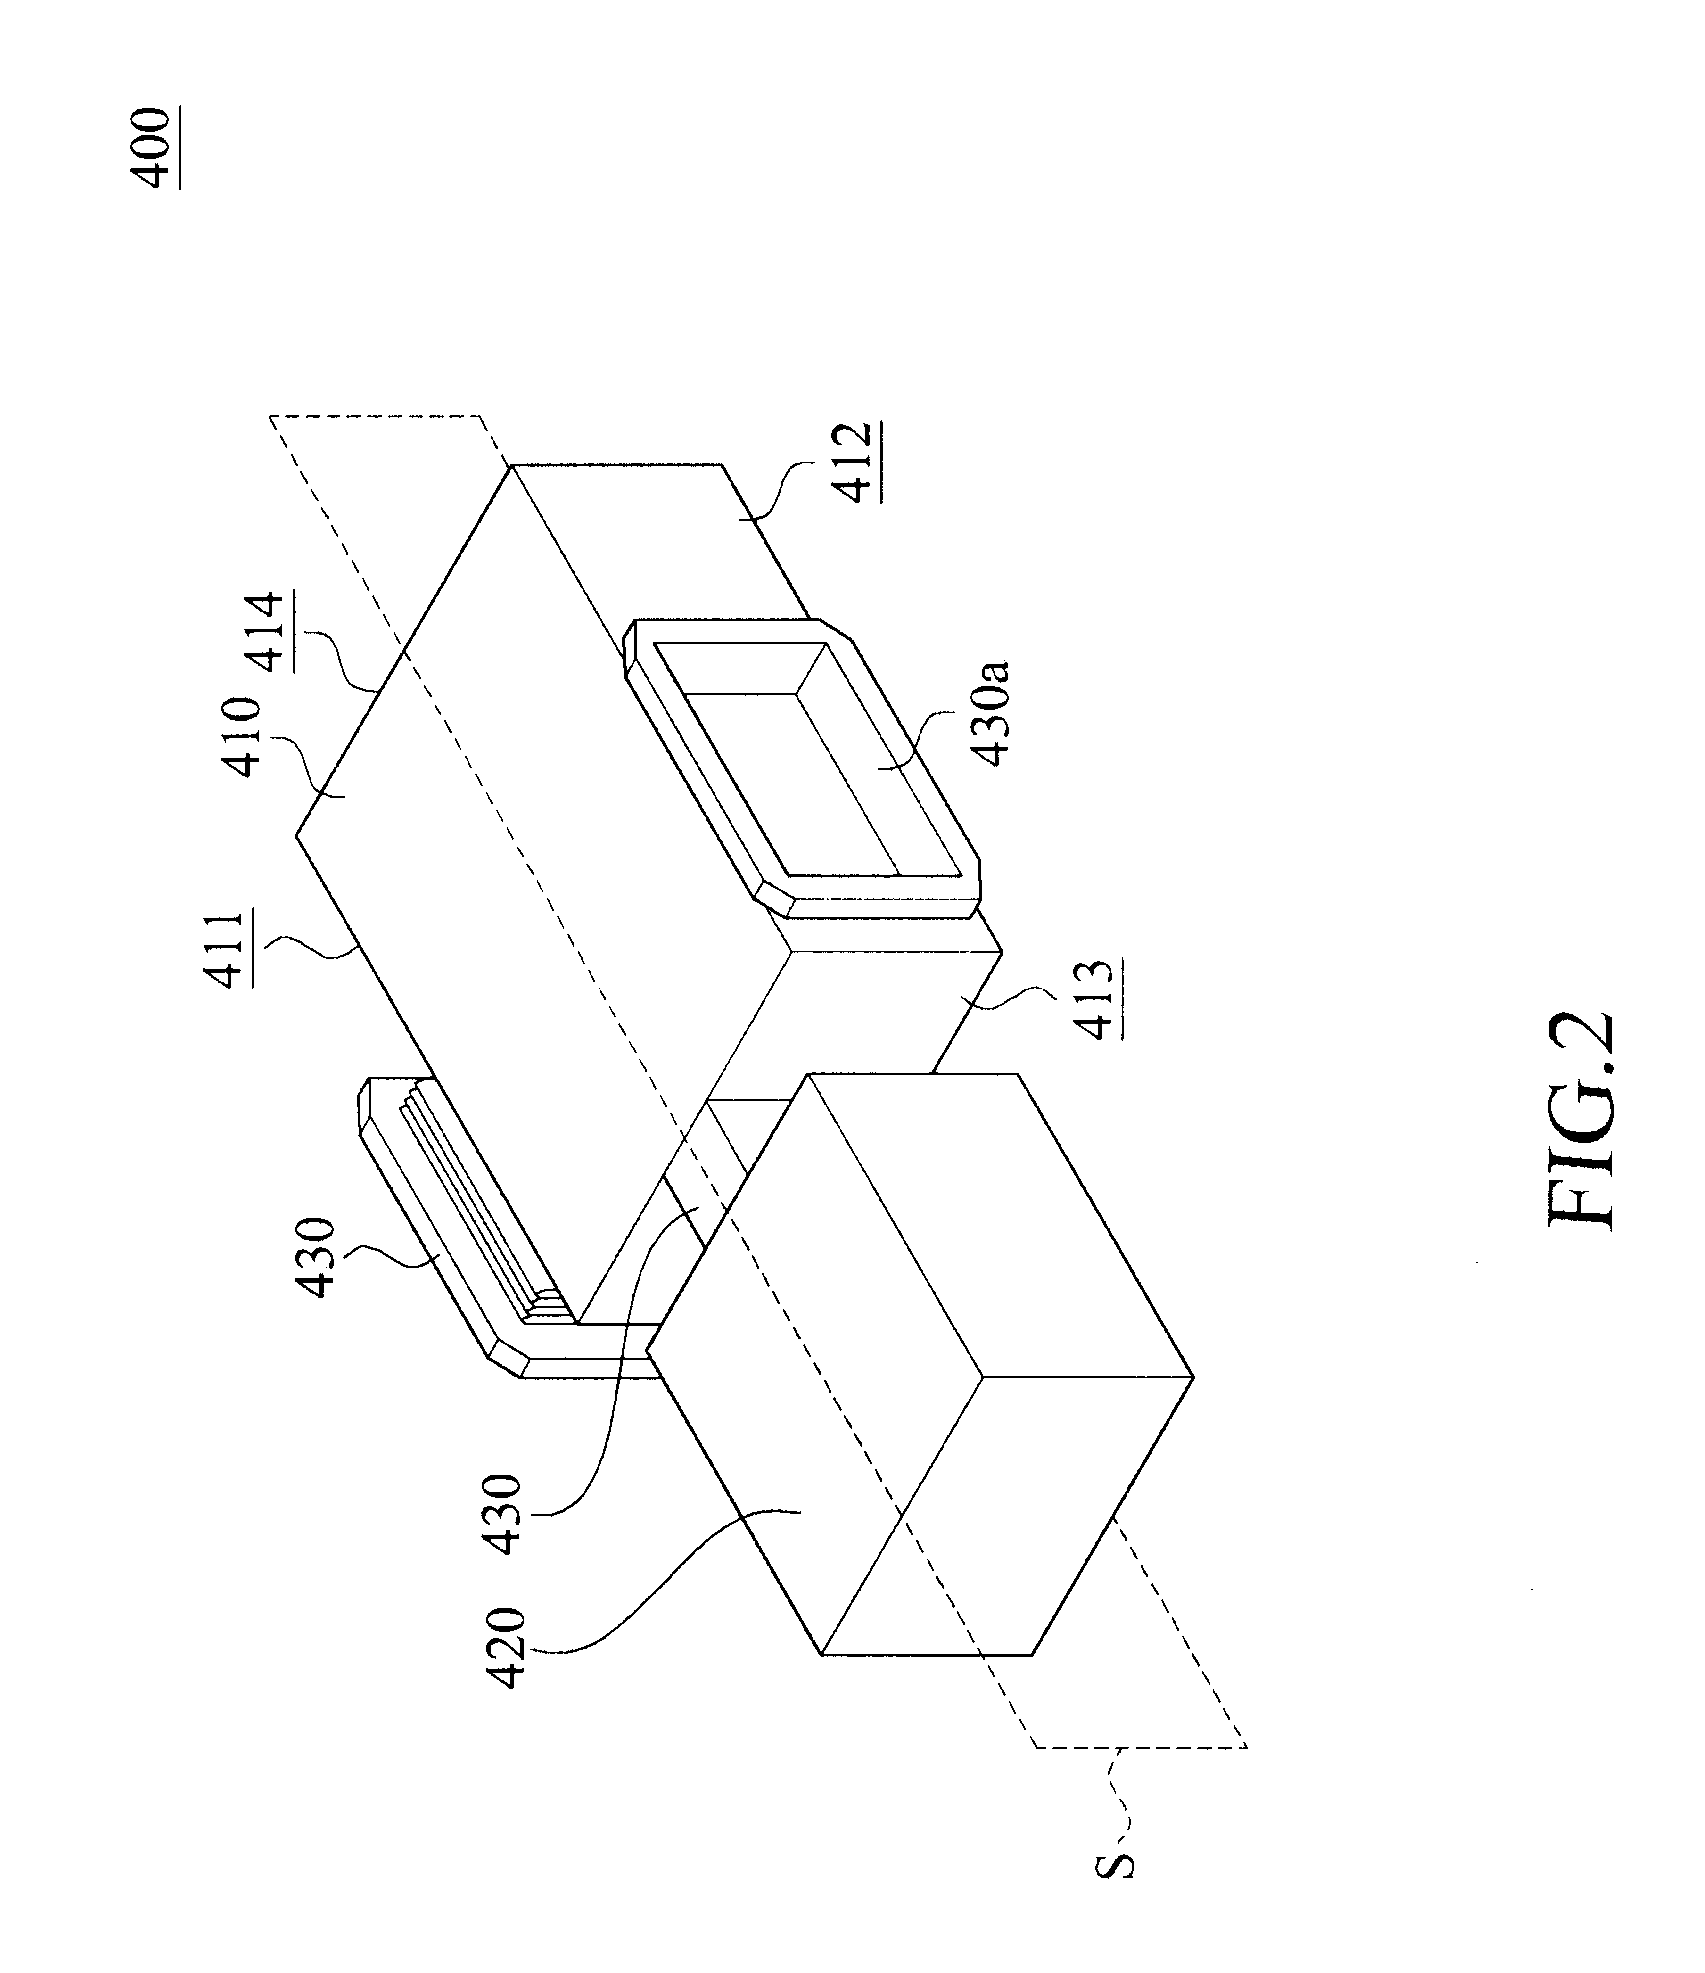 Microwave filter based on a novel combination of single-mode and dual-mode cavities